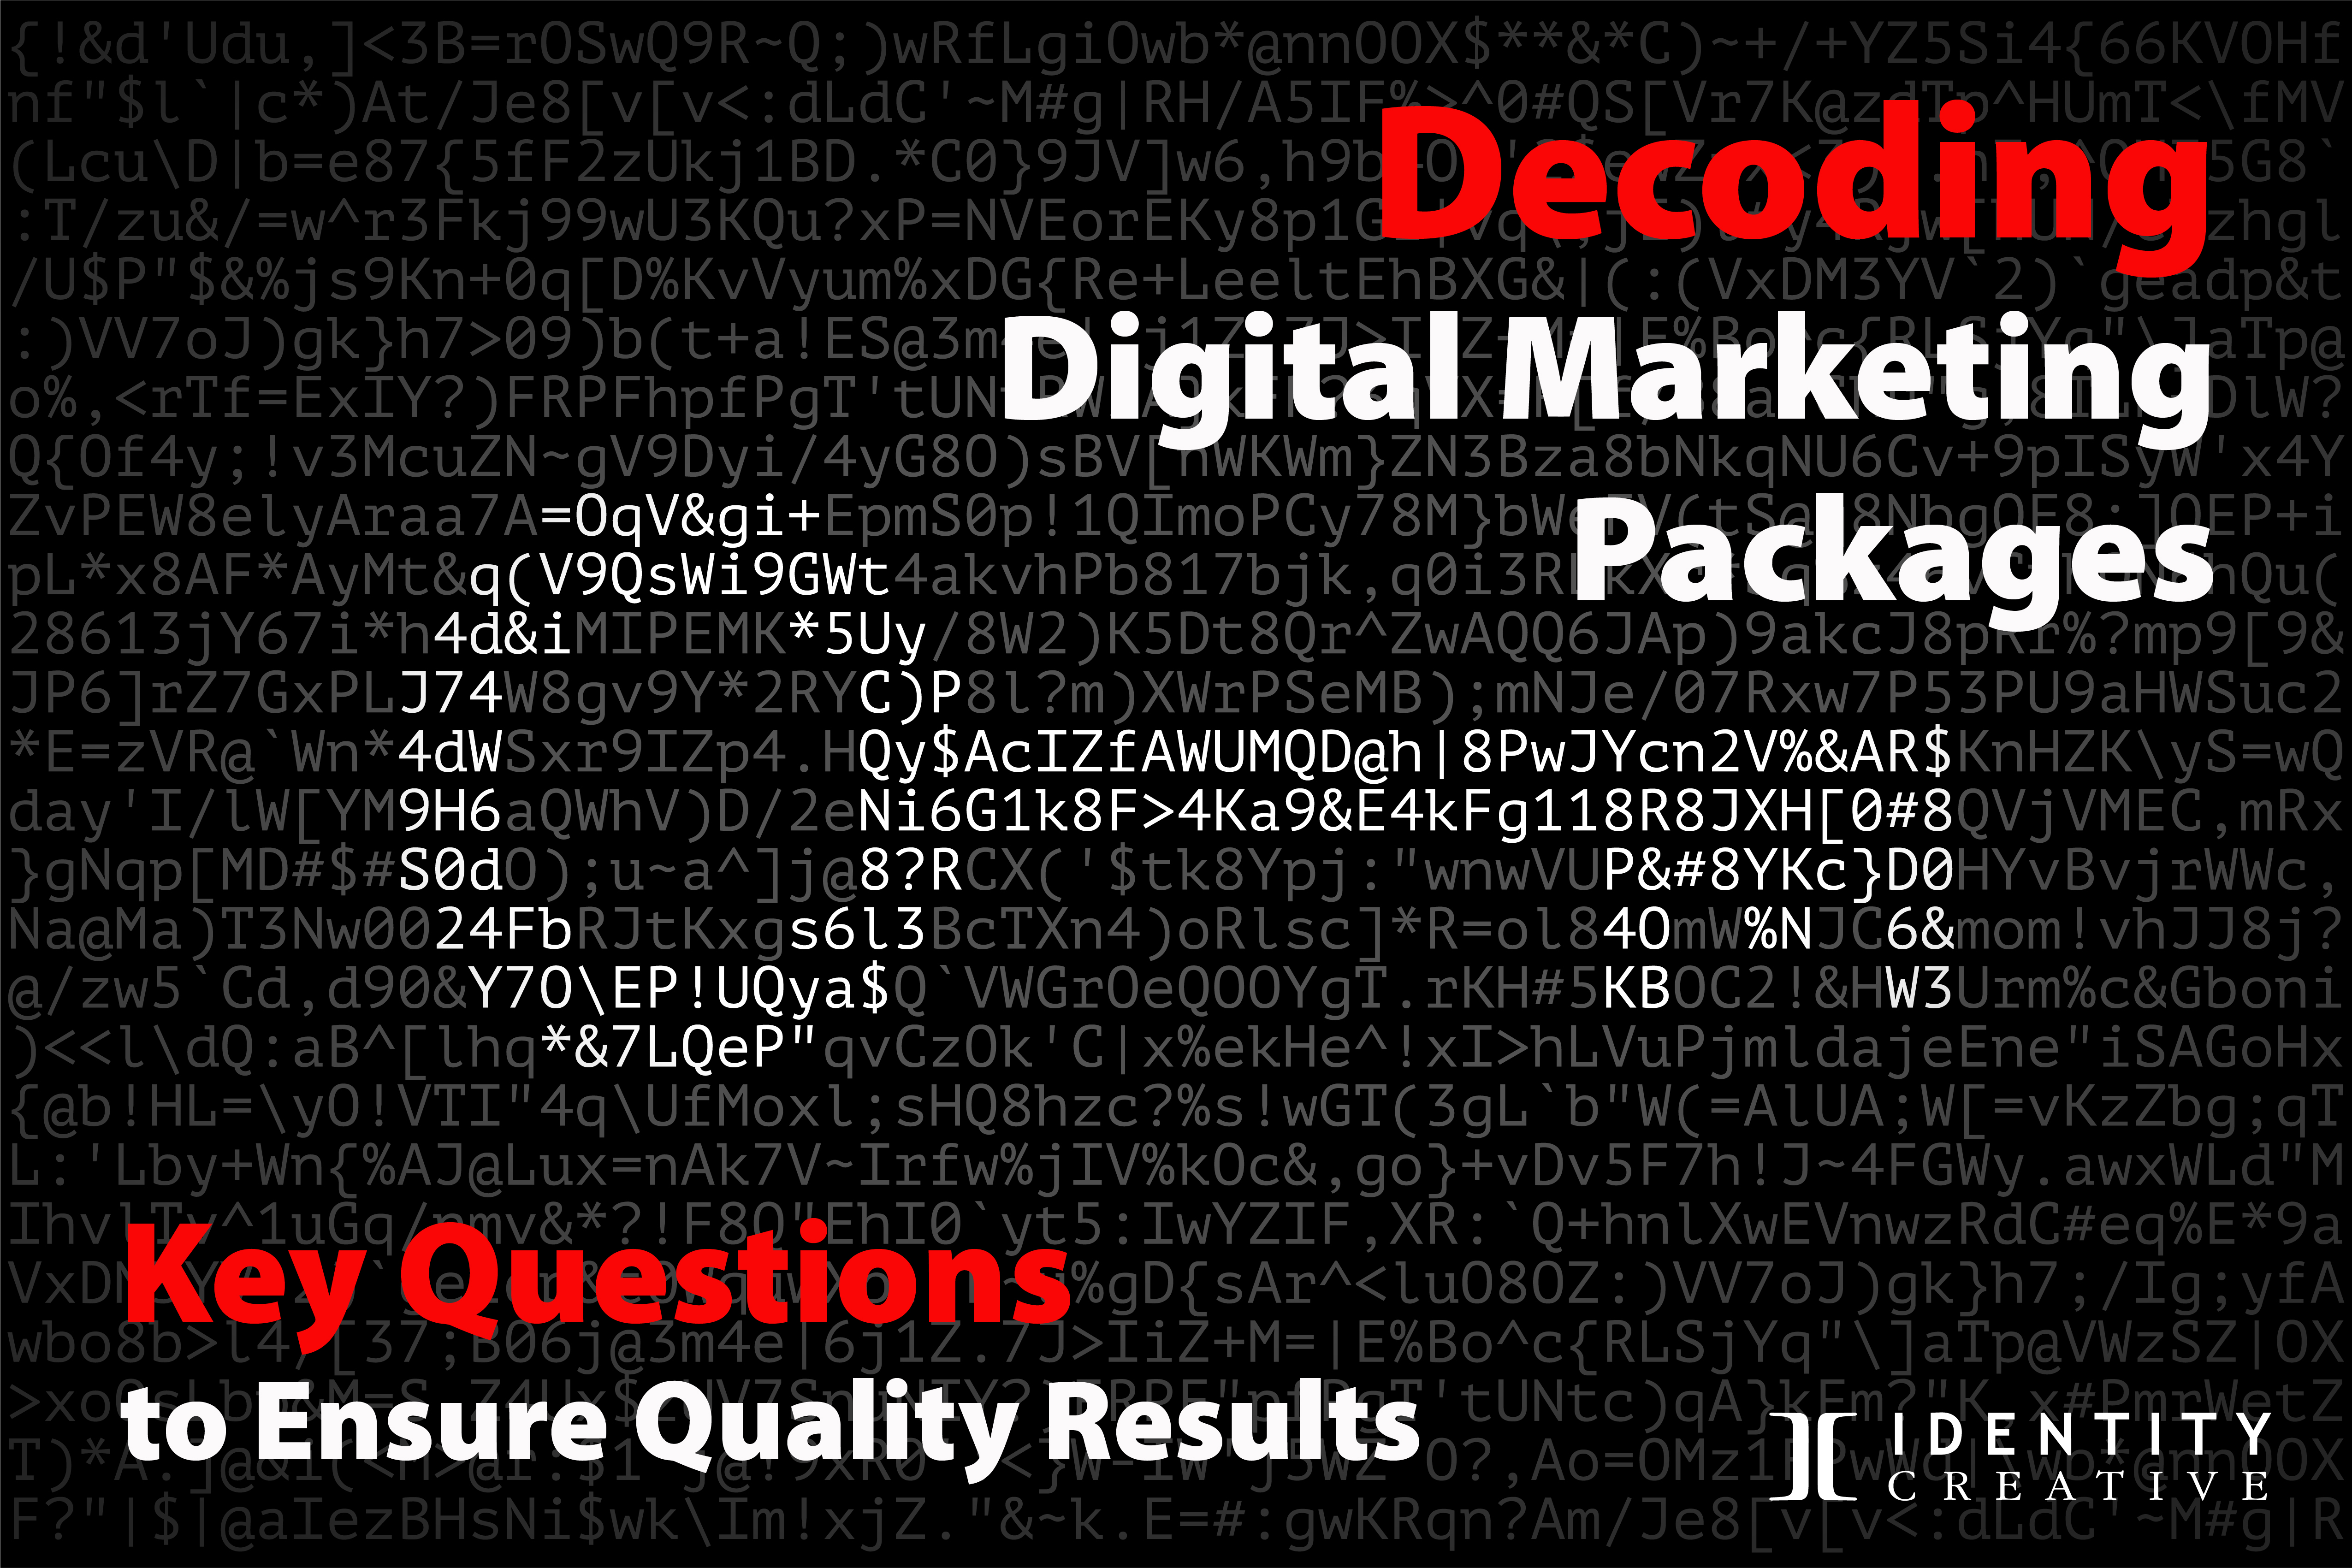 Decoding Digital Marketing Packages: Key Questions to Ensure Quality Results